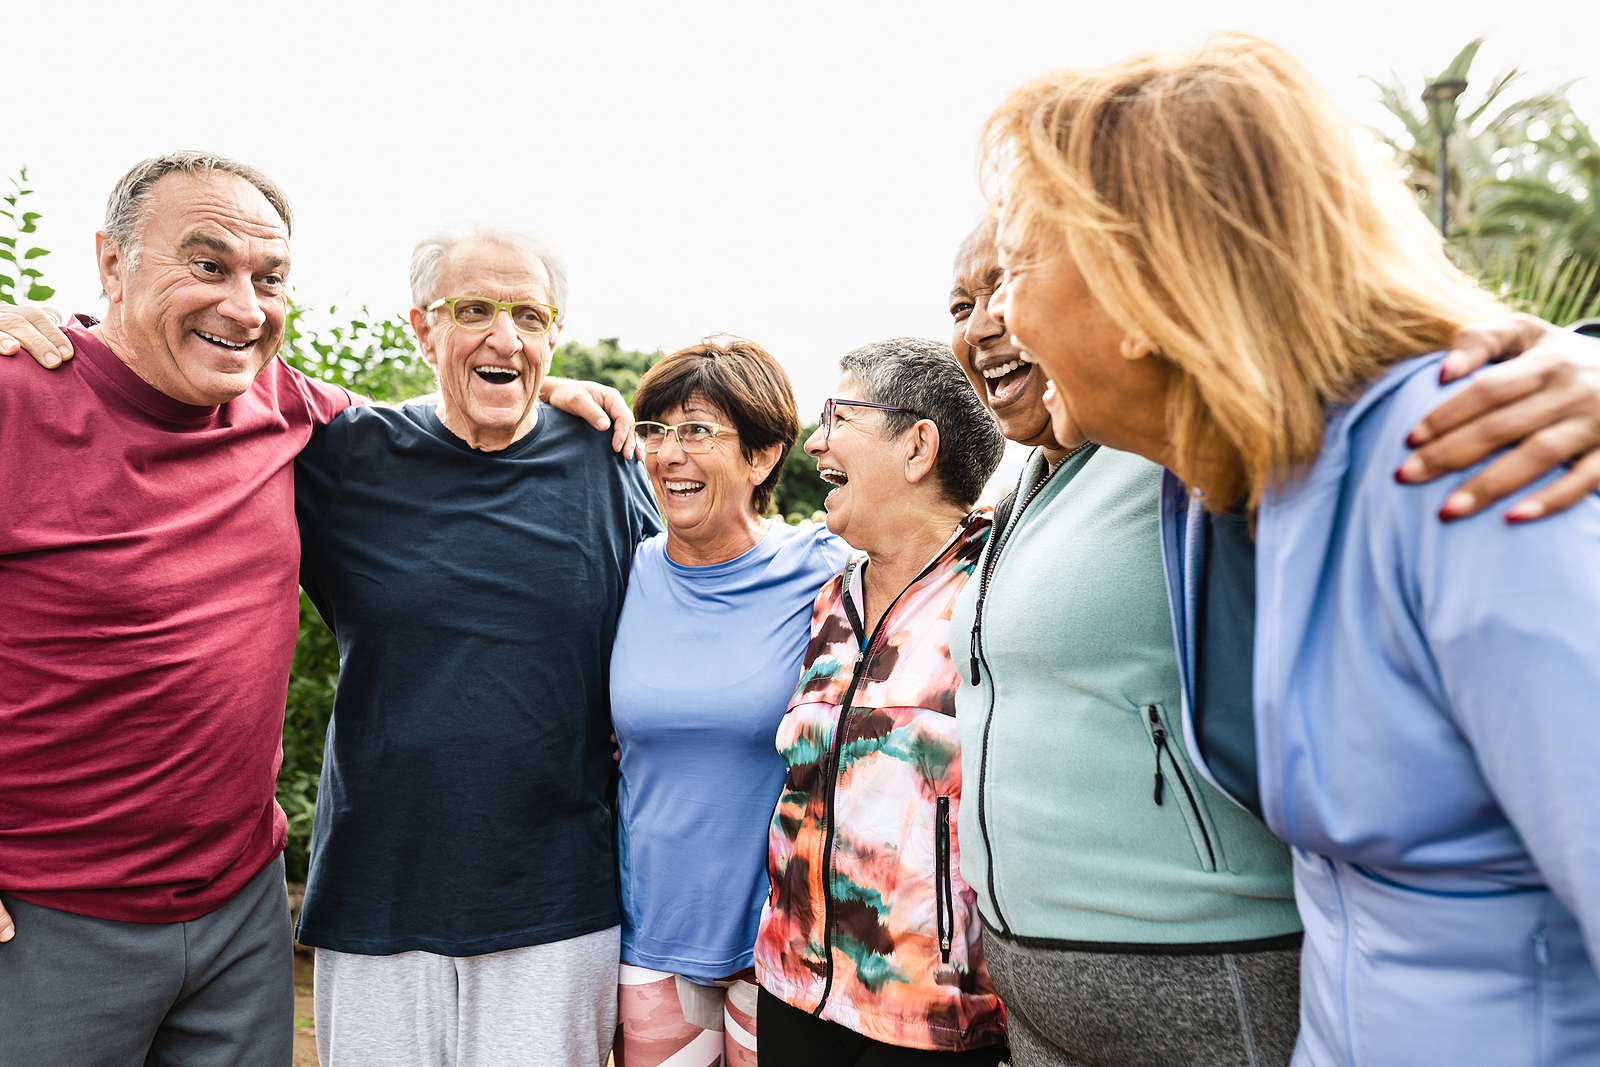 What Helps Seniors to Stay Well Emotionally?